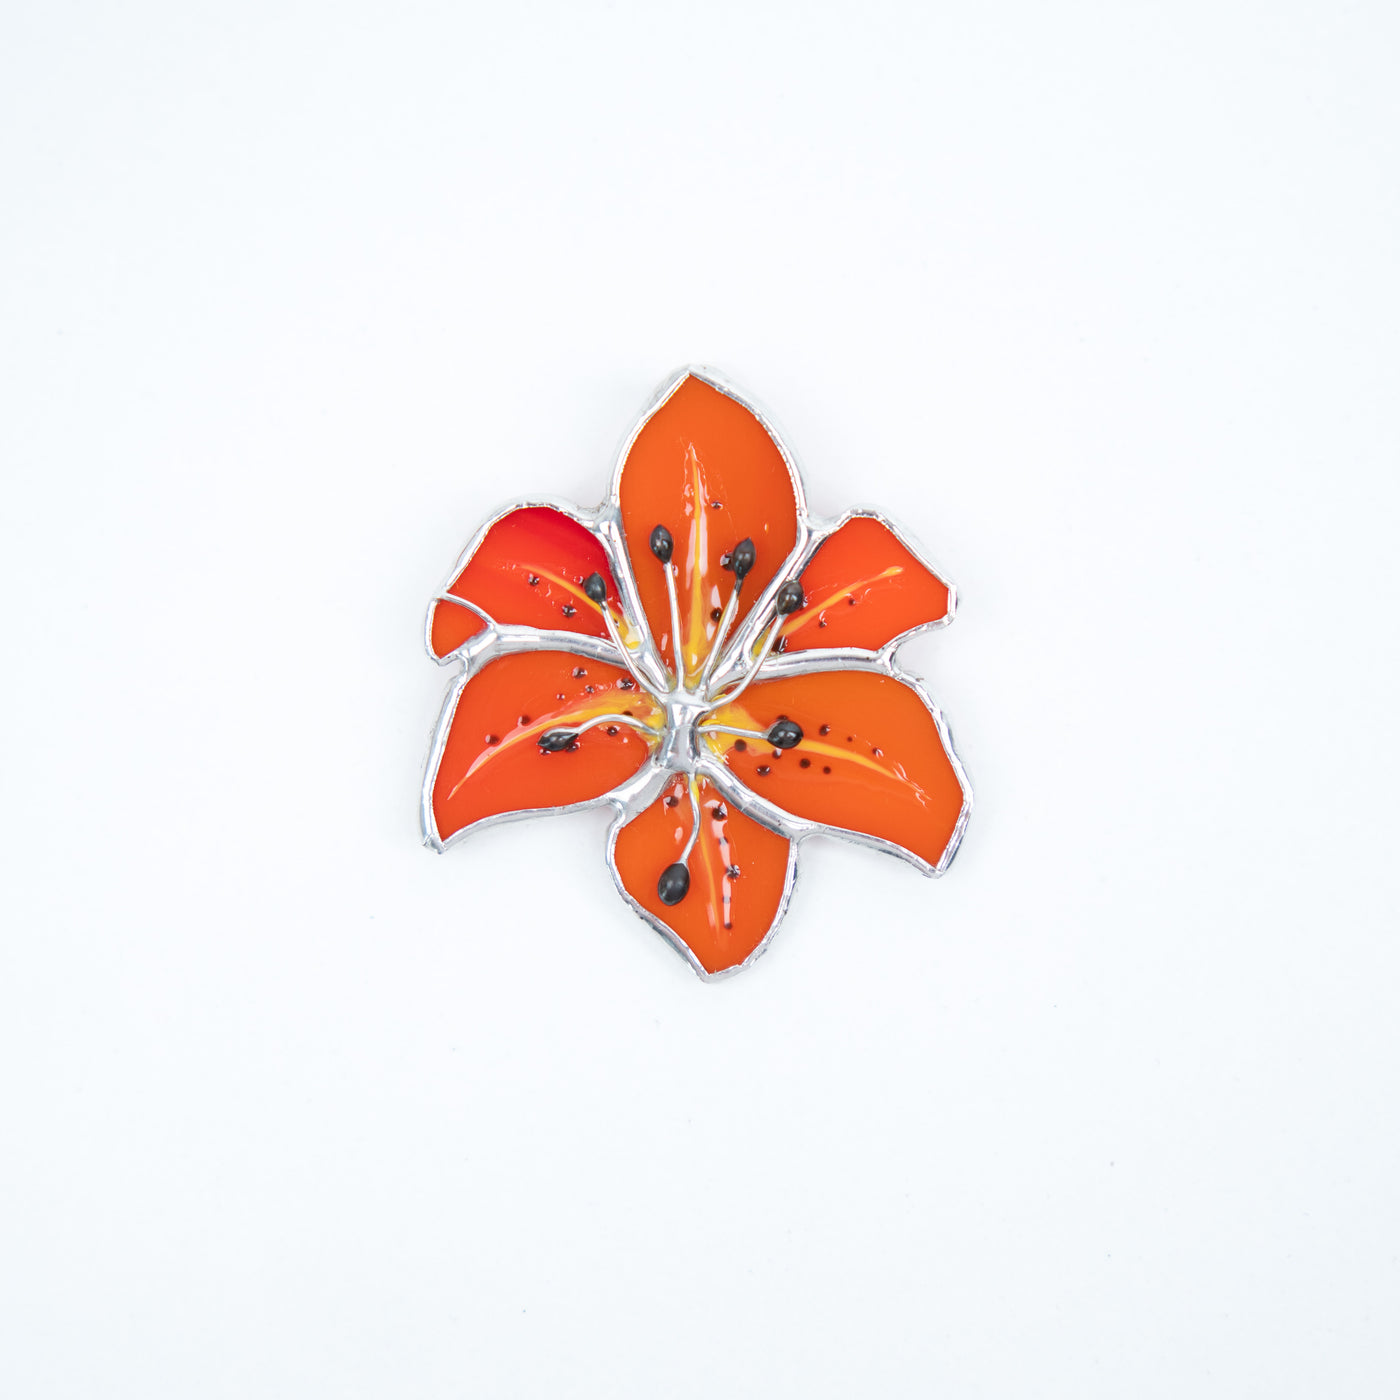 Lily pin of stained glass